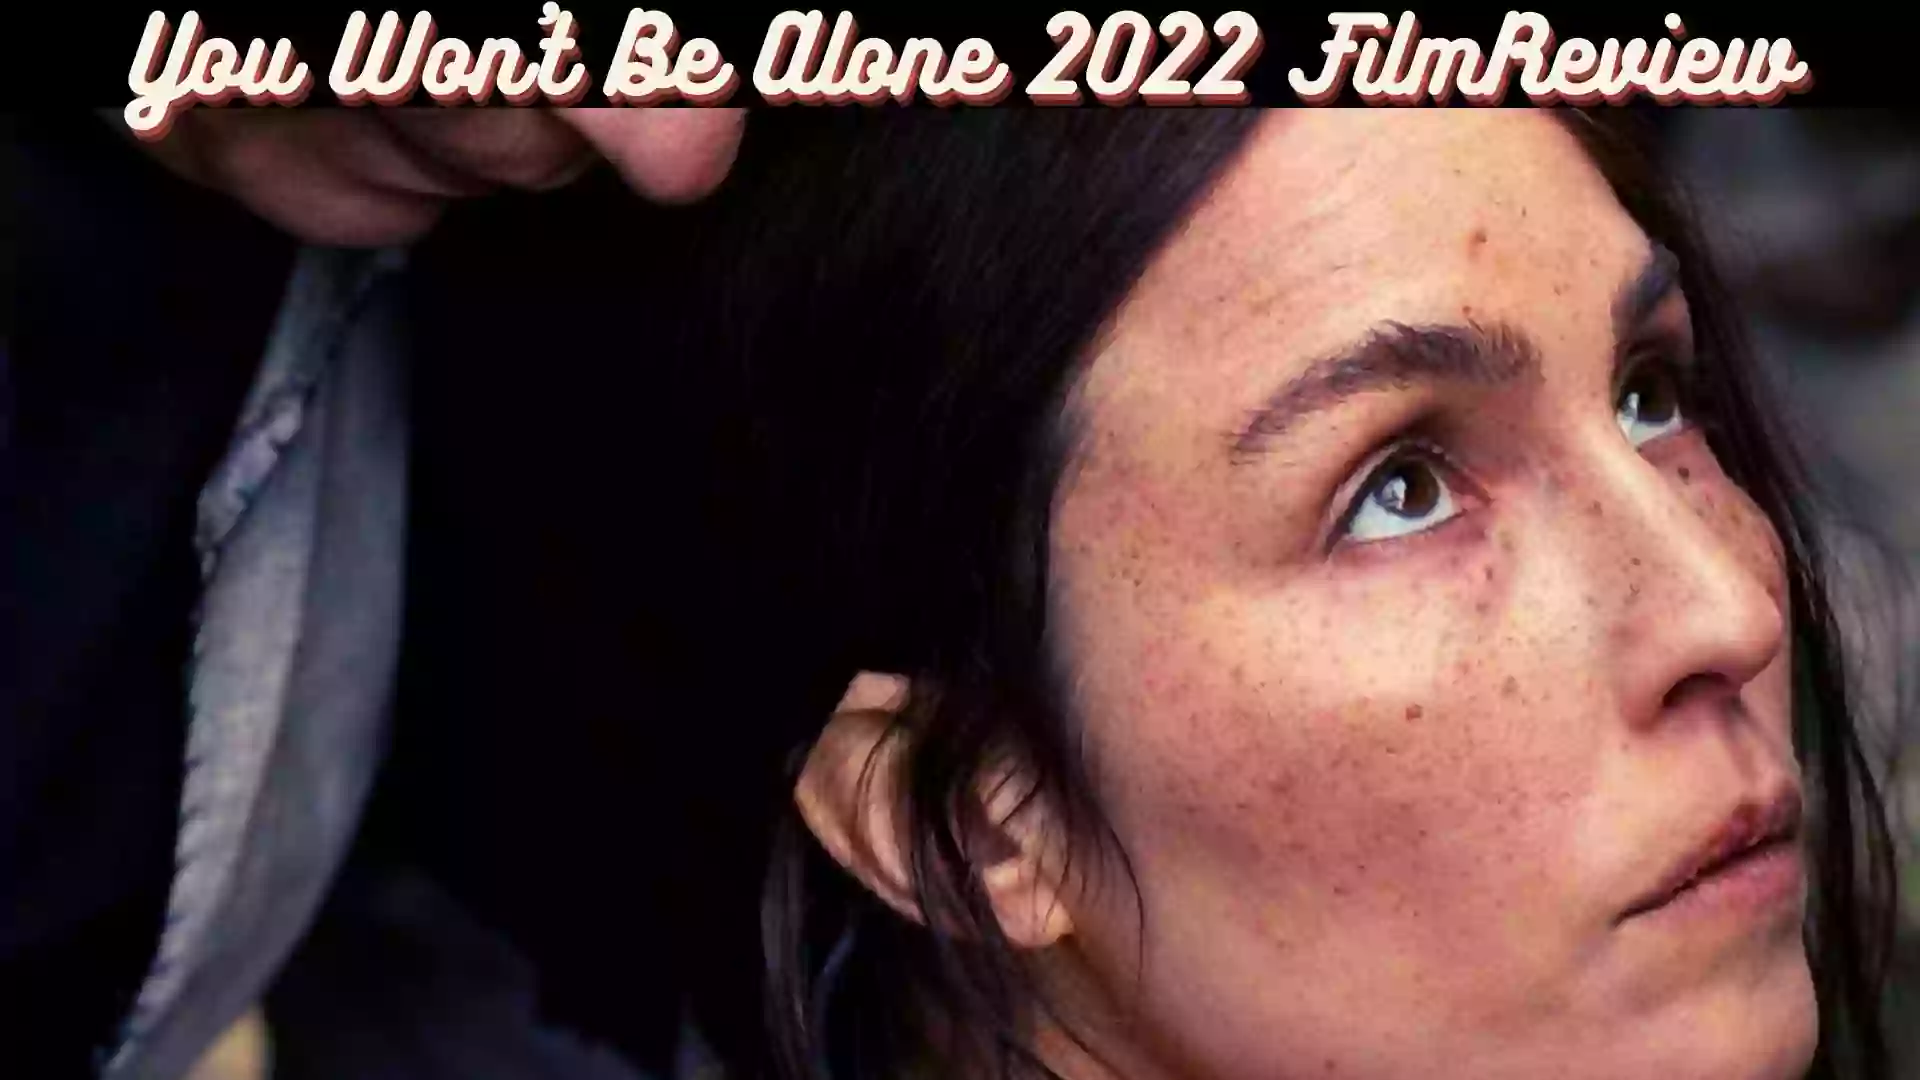 You Won't Be Alone Review | You Won't Be Alone 2022